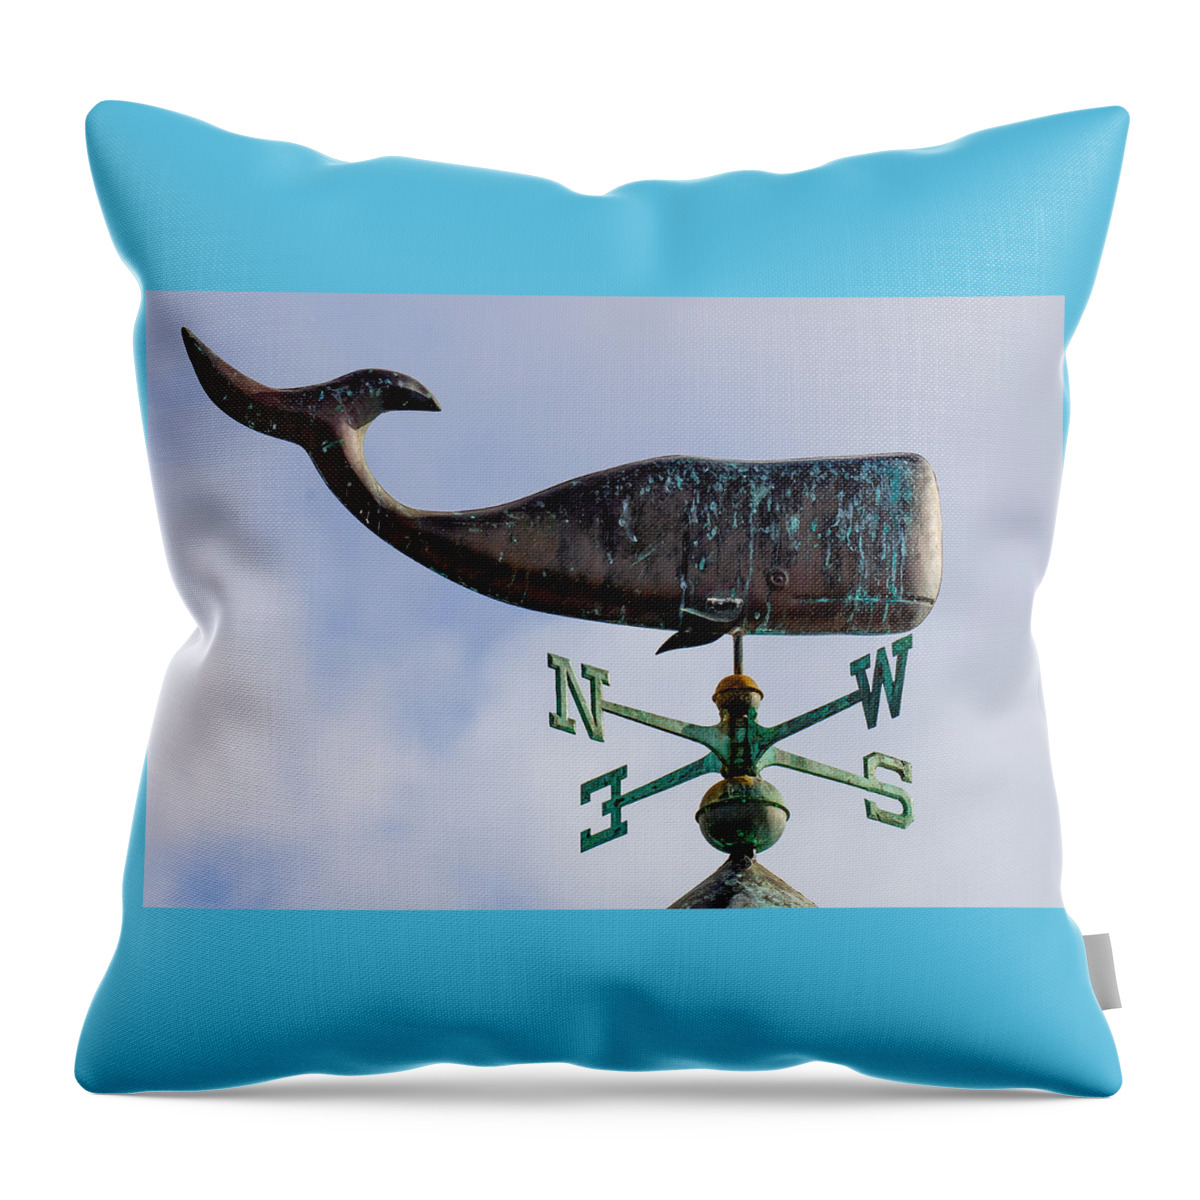 Whale Throw Pillow featuring the photograph Whale Weather Vane by Derek Dean